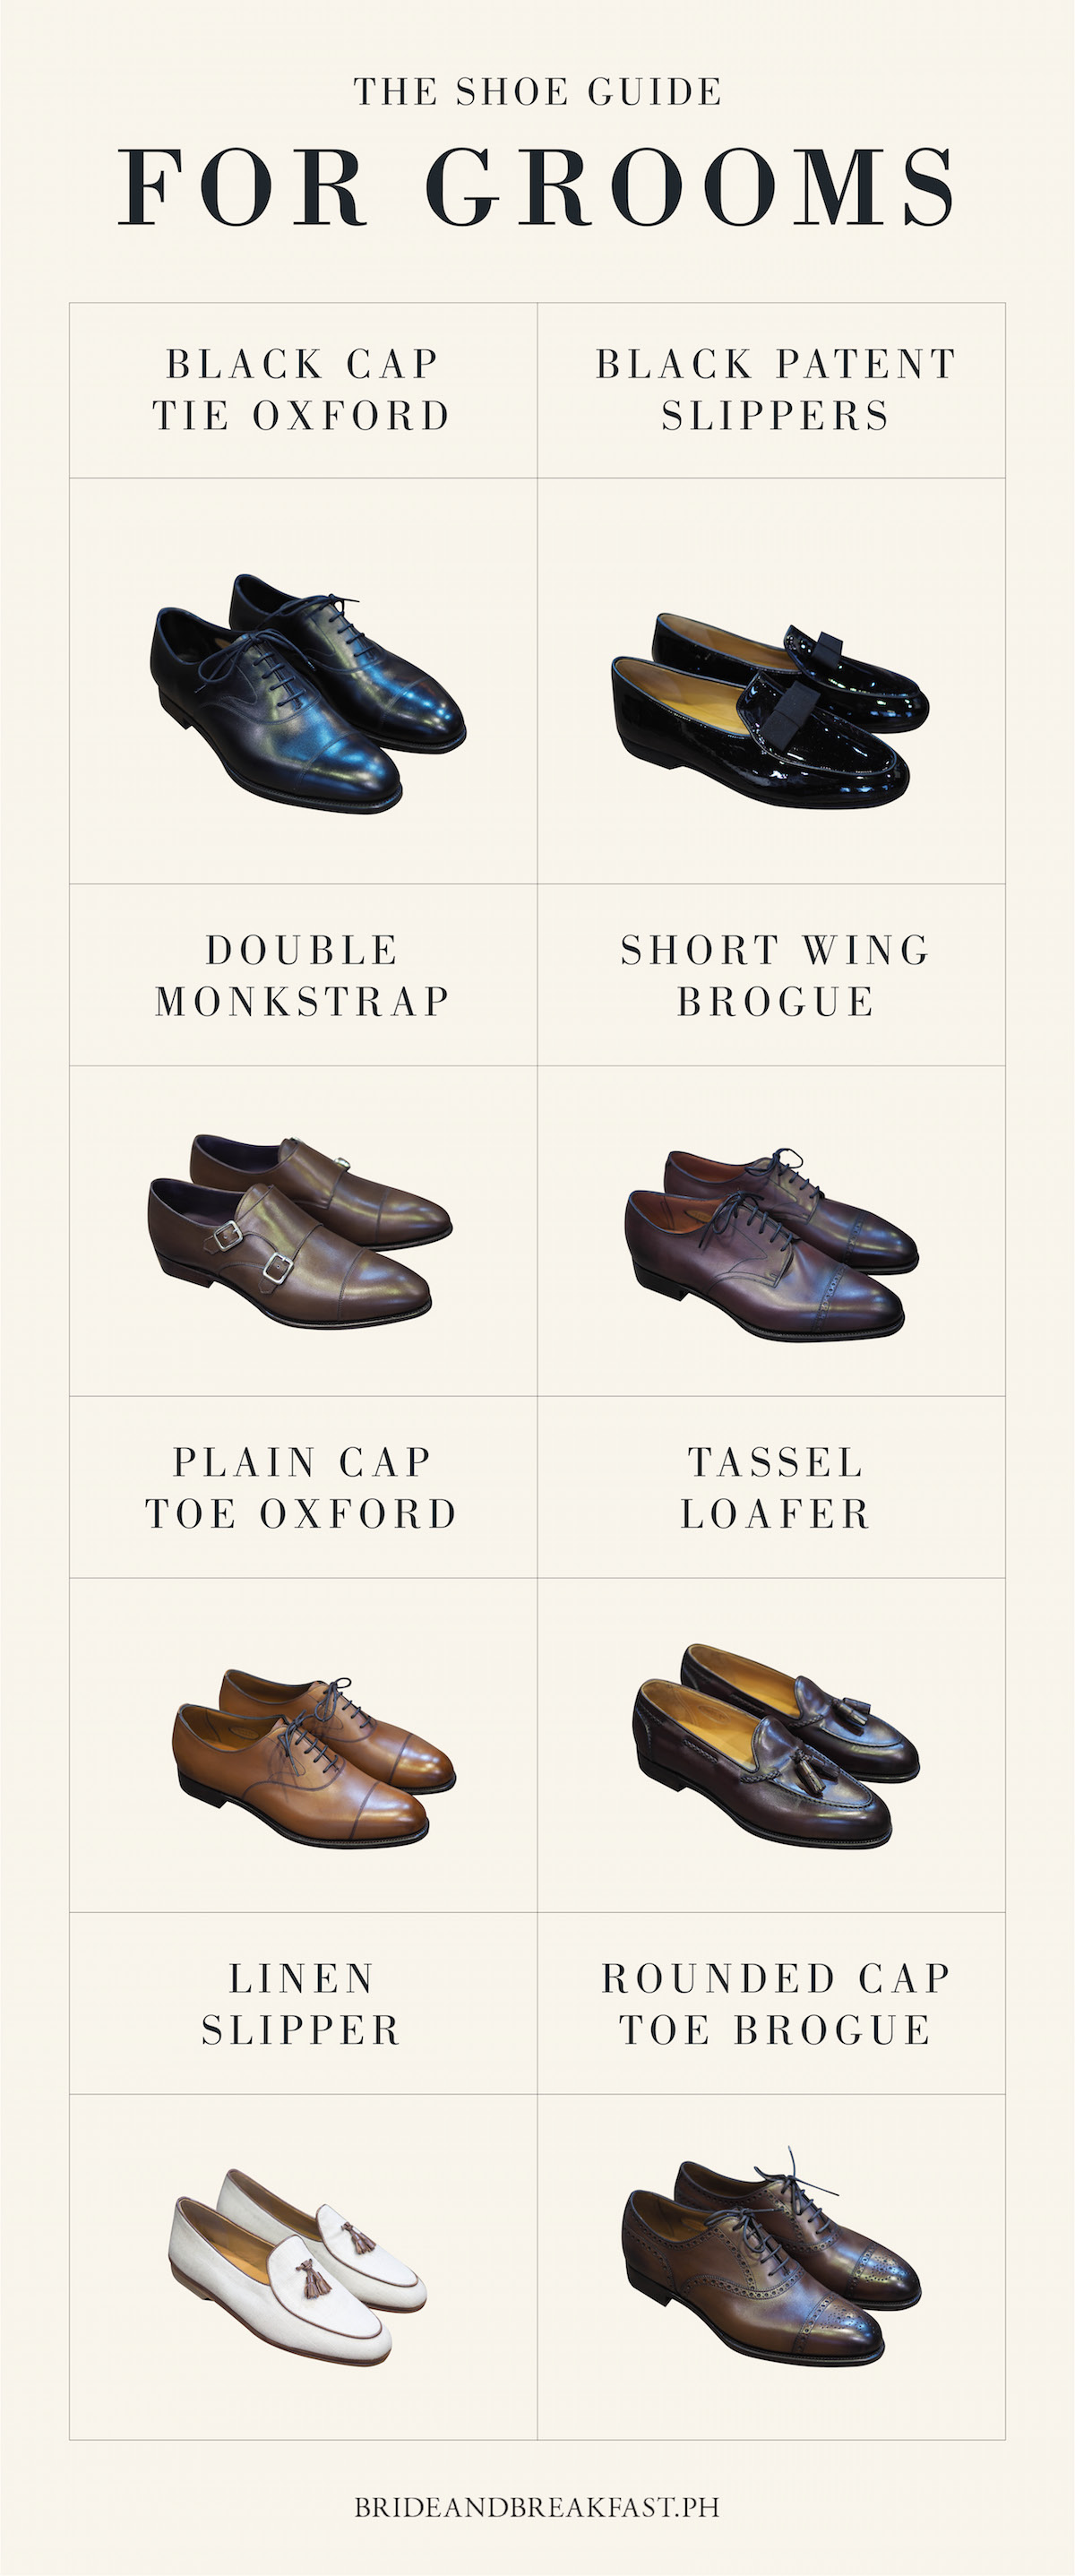 The Shoe Guide For Grooms Black Cap Tie Oxford Black Patent Slippers Double Monkstrap Short Wing Brogue Plain Cap Toe Oxford Tassel Loafer Linen Slipper Rounded Cap Toe Brogue